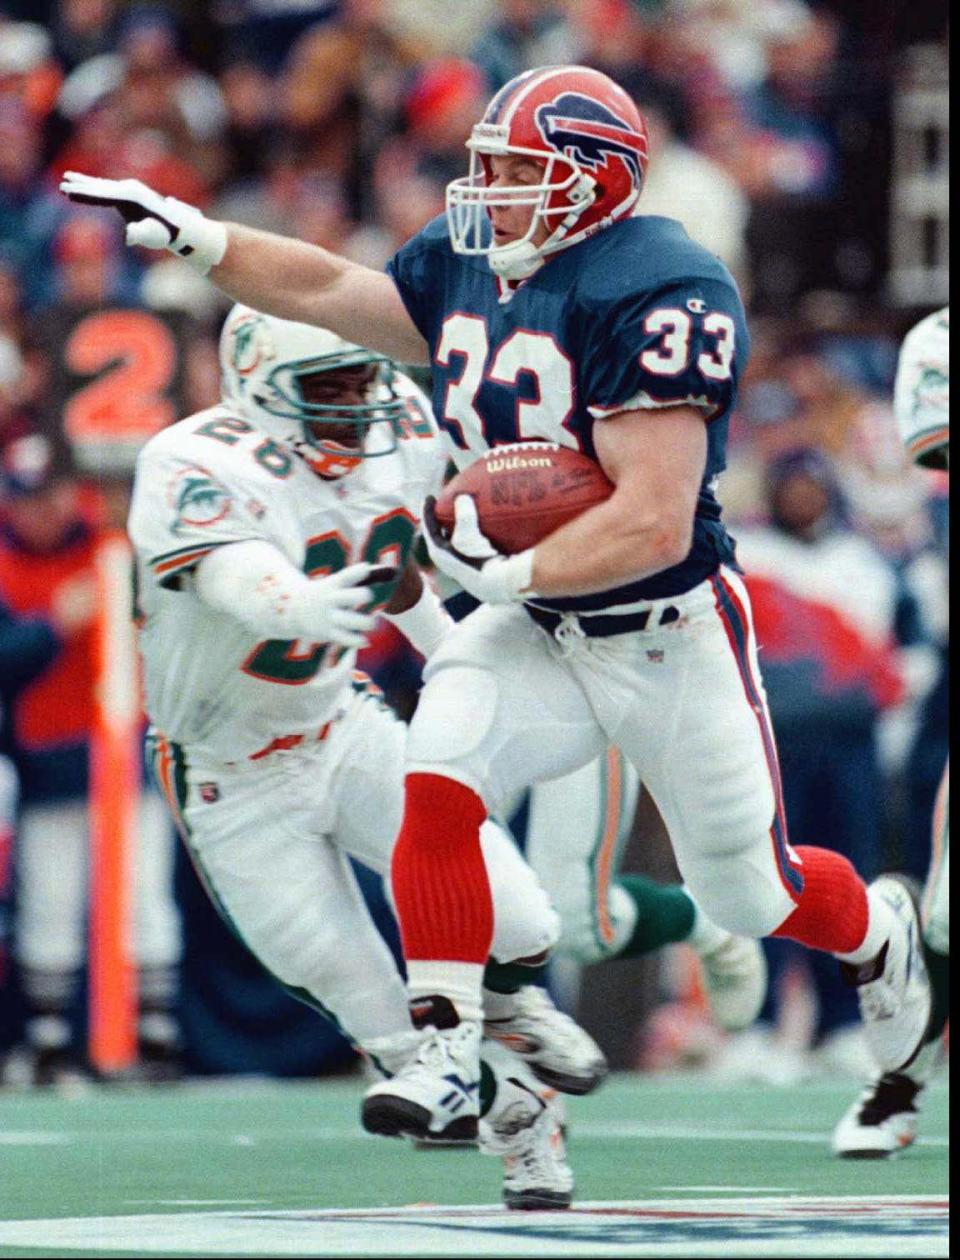 Unheralded fullback Tim Tindale made the play of his career, a 44-yard TD run against Miami in the 1995 wild-card game.